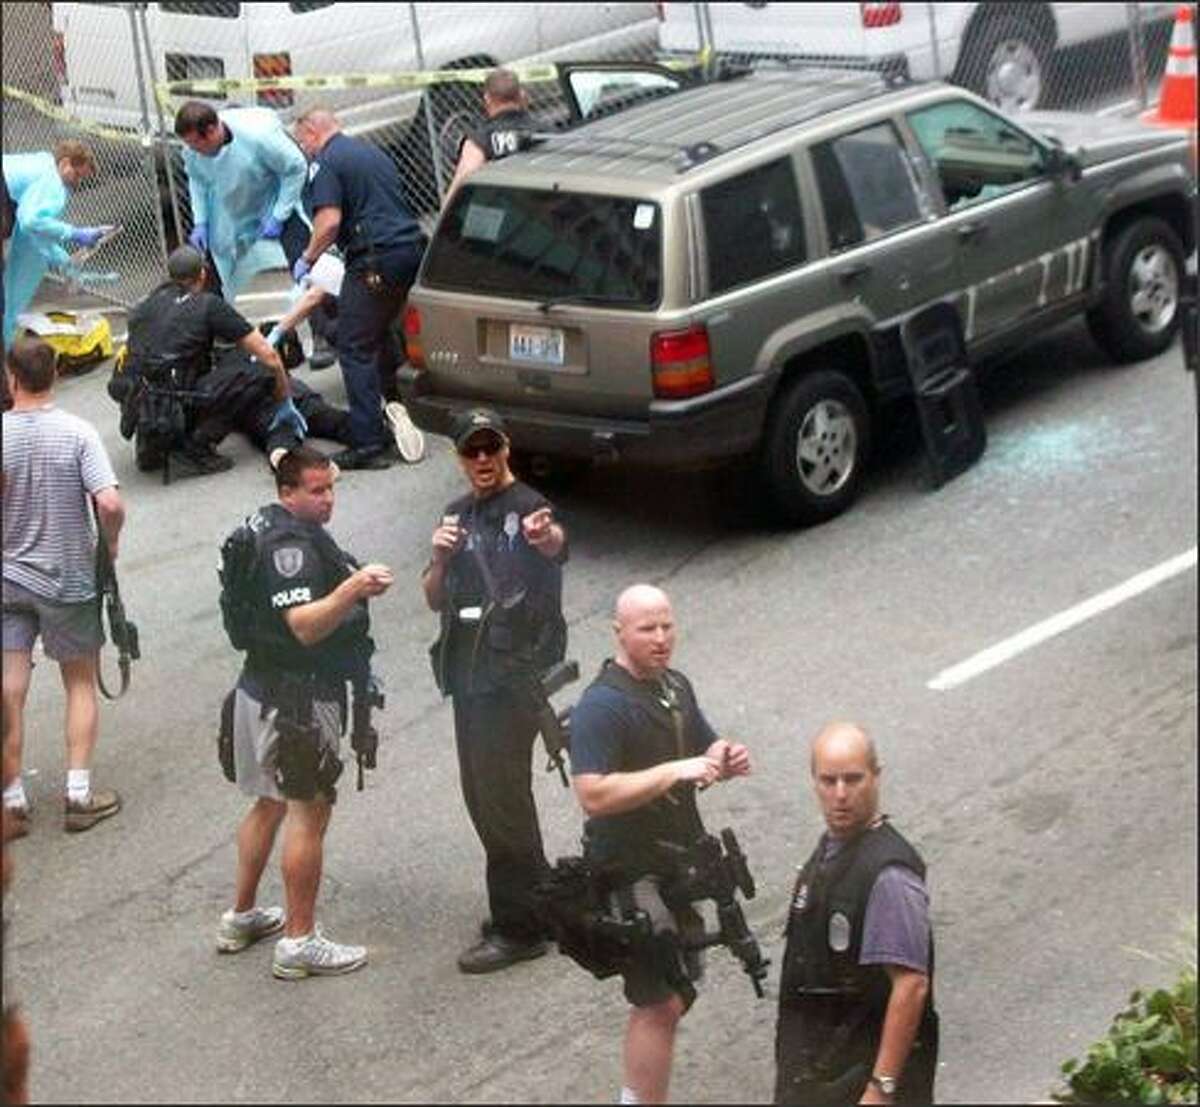 Paramedics attend to a subject (back left) who was shot by police and pulled from the Jeep shown. (Photo by Michele DeMaris)